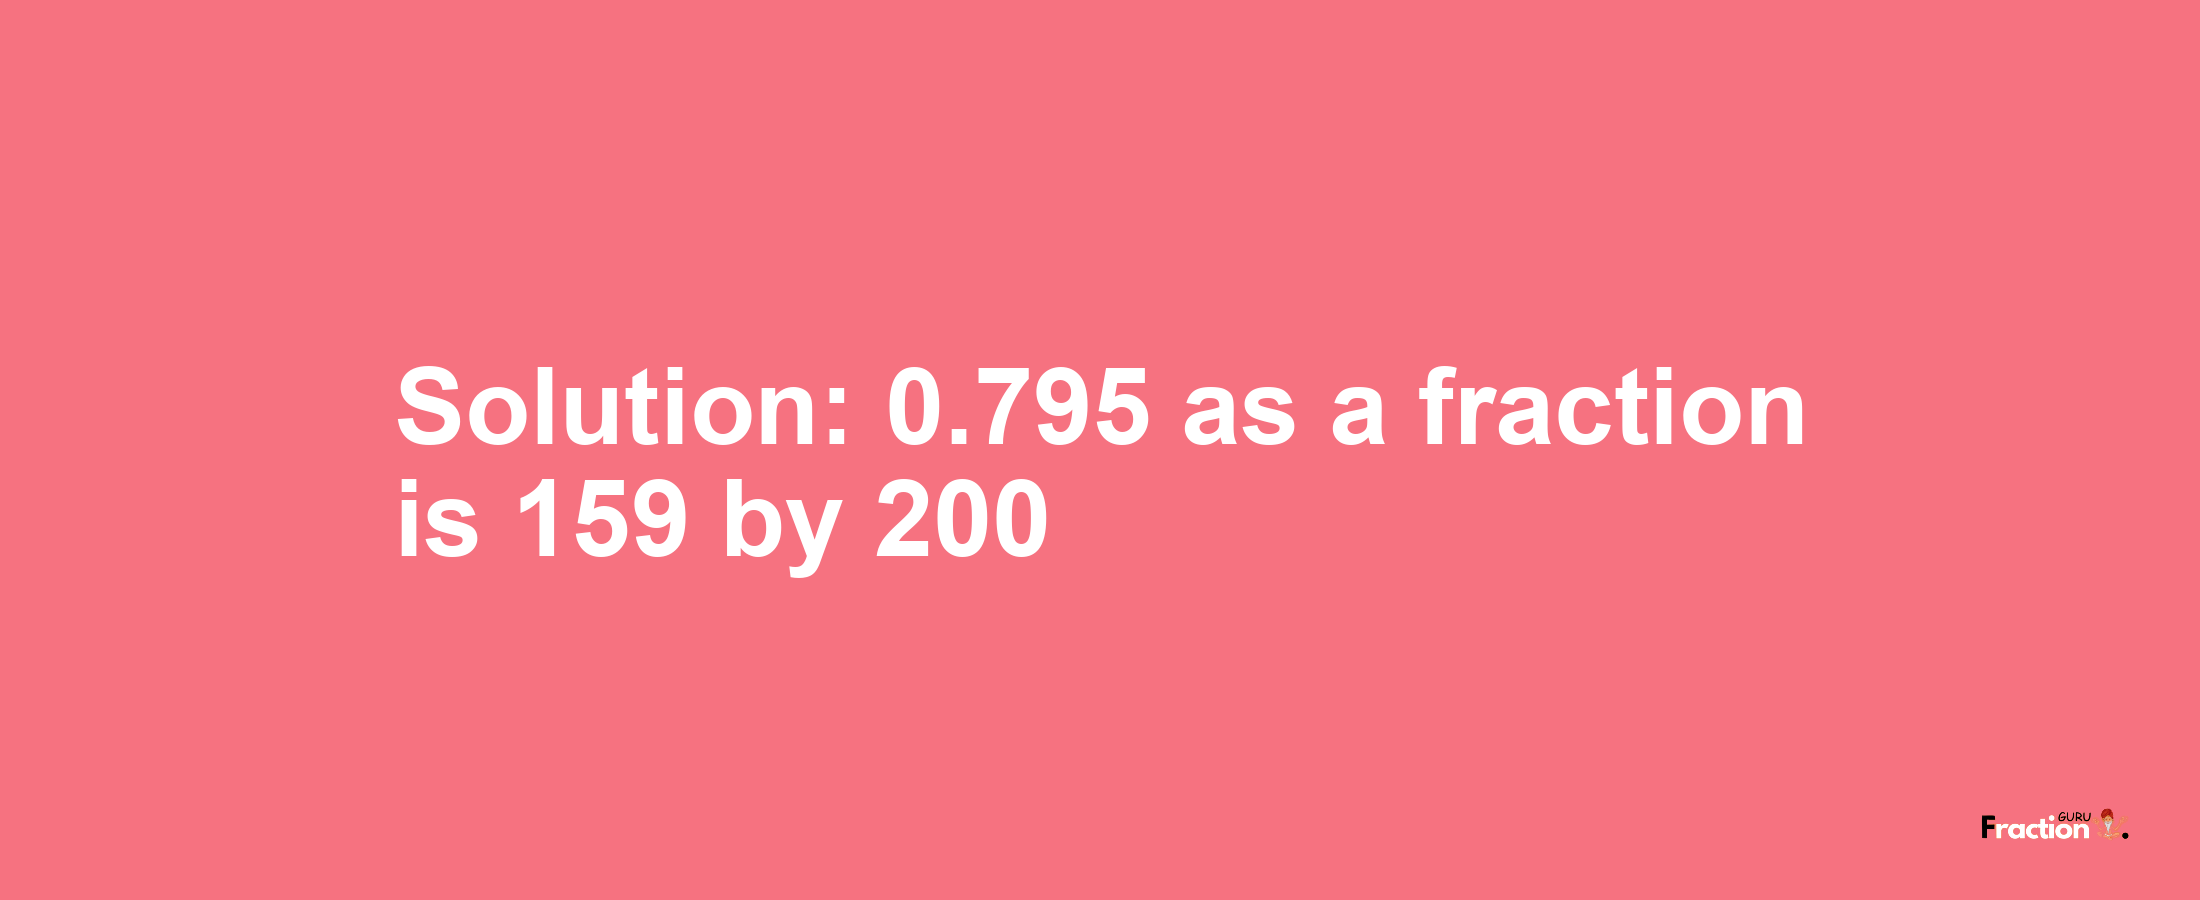 Solution:0.795 as a fraction is 159/200